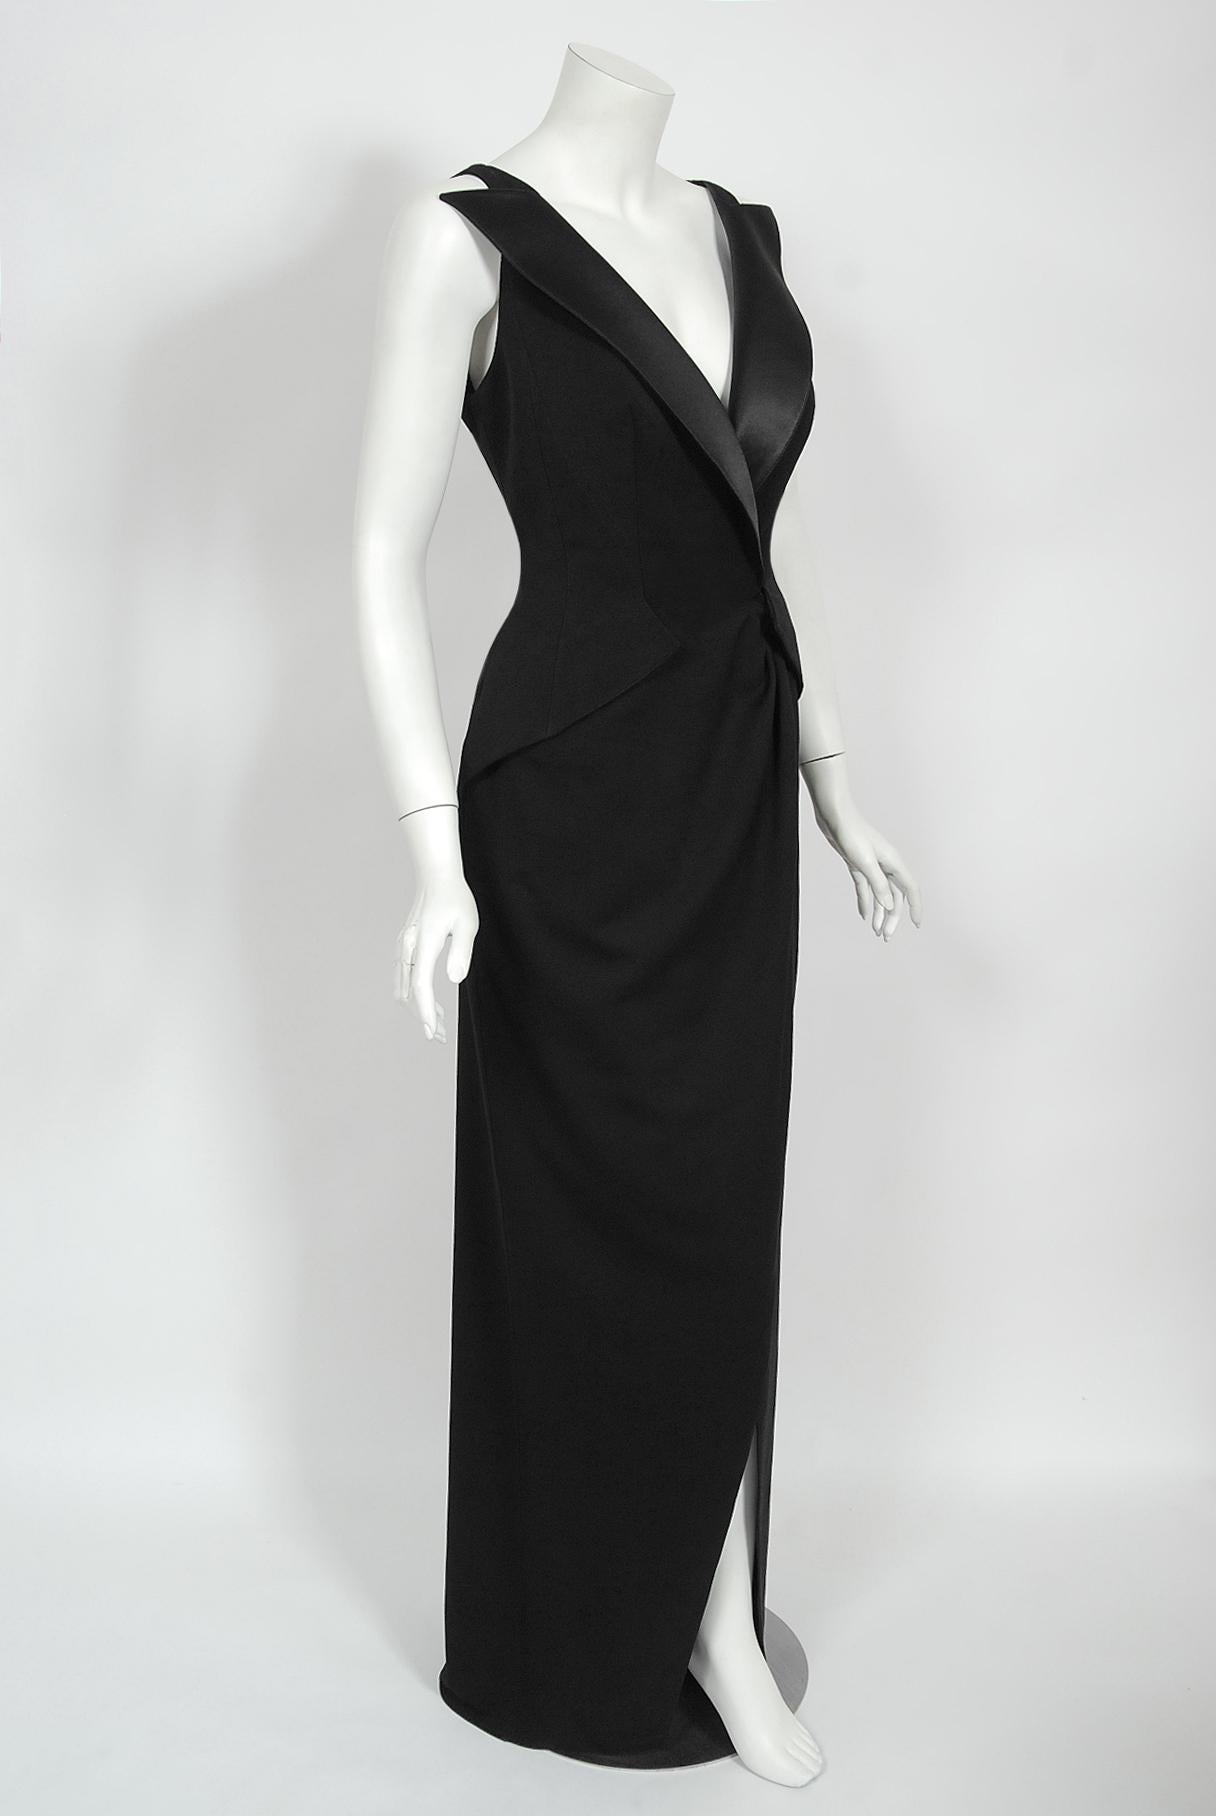 Women's Vintage 1999 Thierry Mugler Couture Black Silk Bustier Low-Cut Hourglass Gown